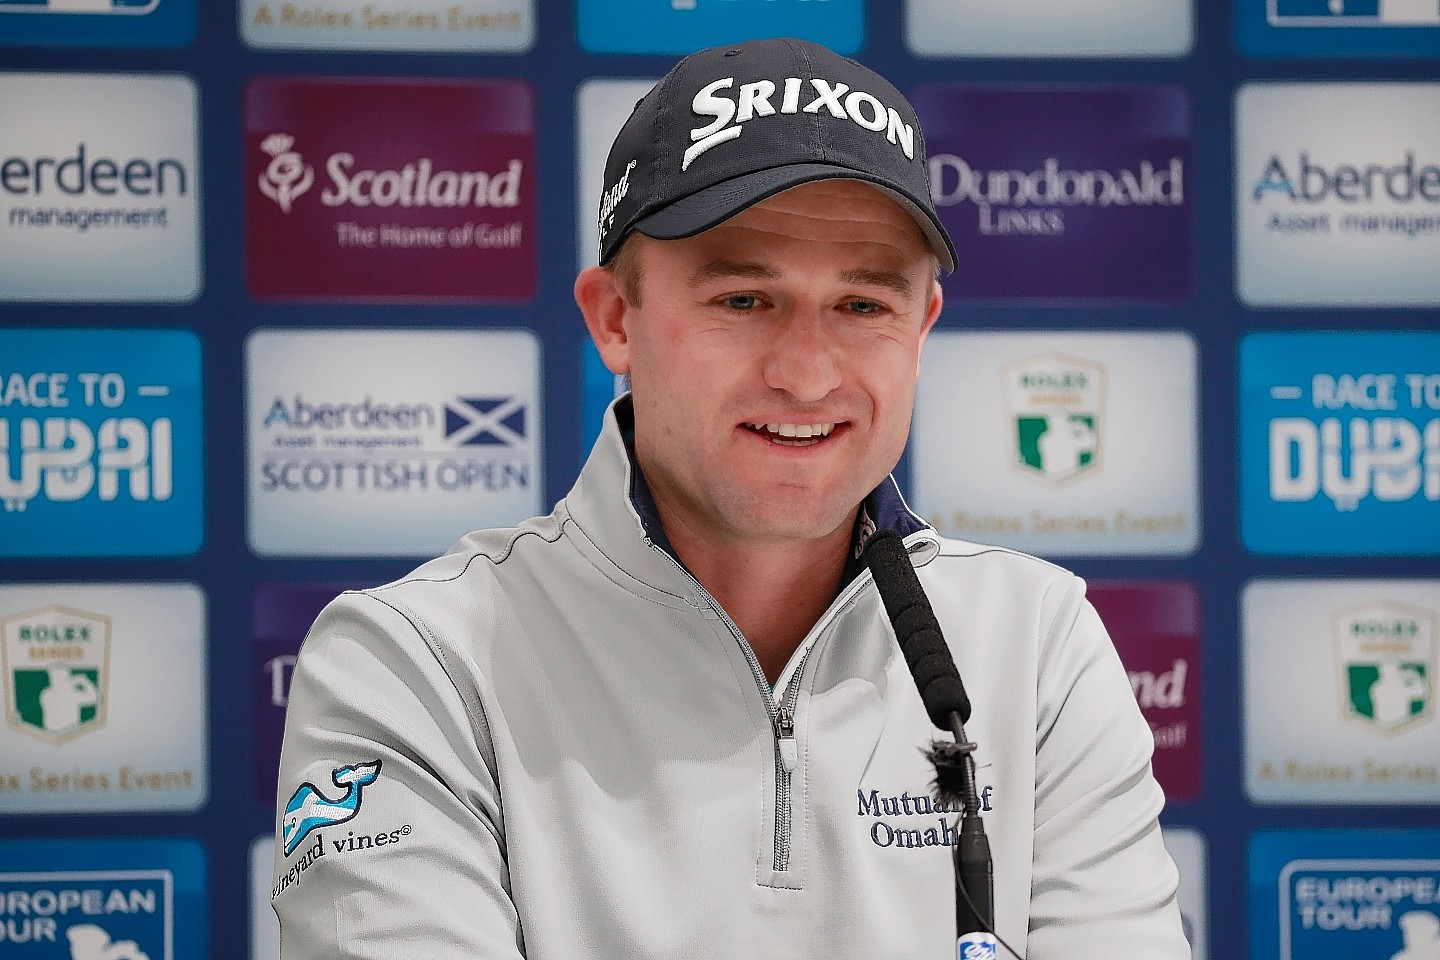 Russell Knox tees off at 3.21pm at Carnoustie on Thursday.